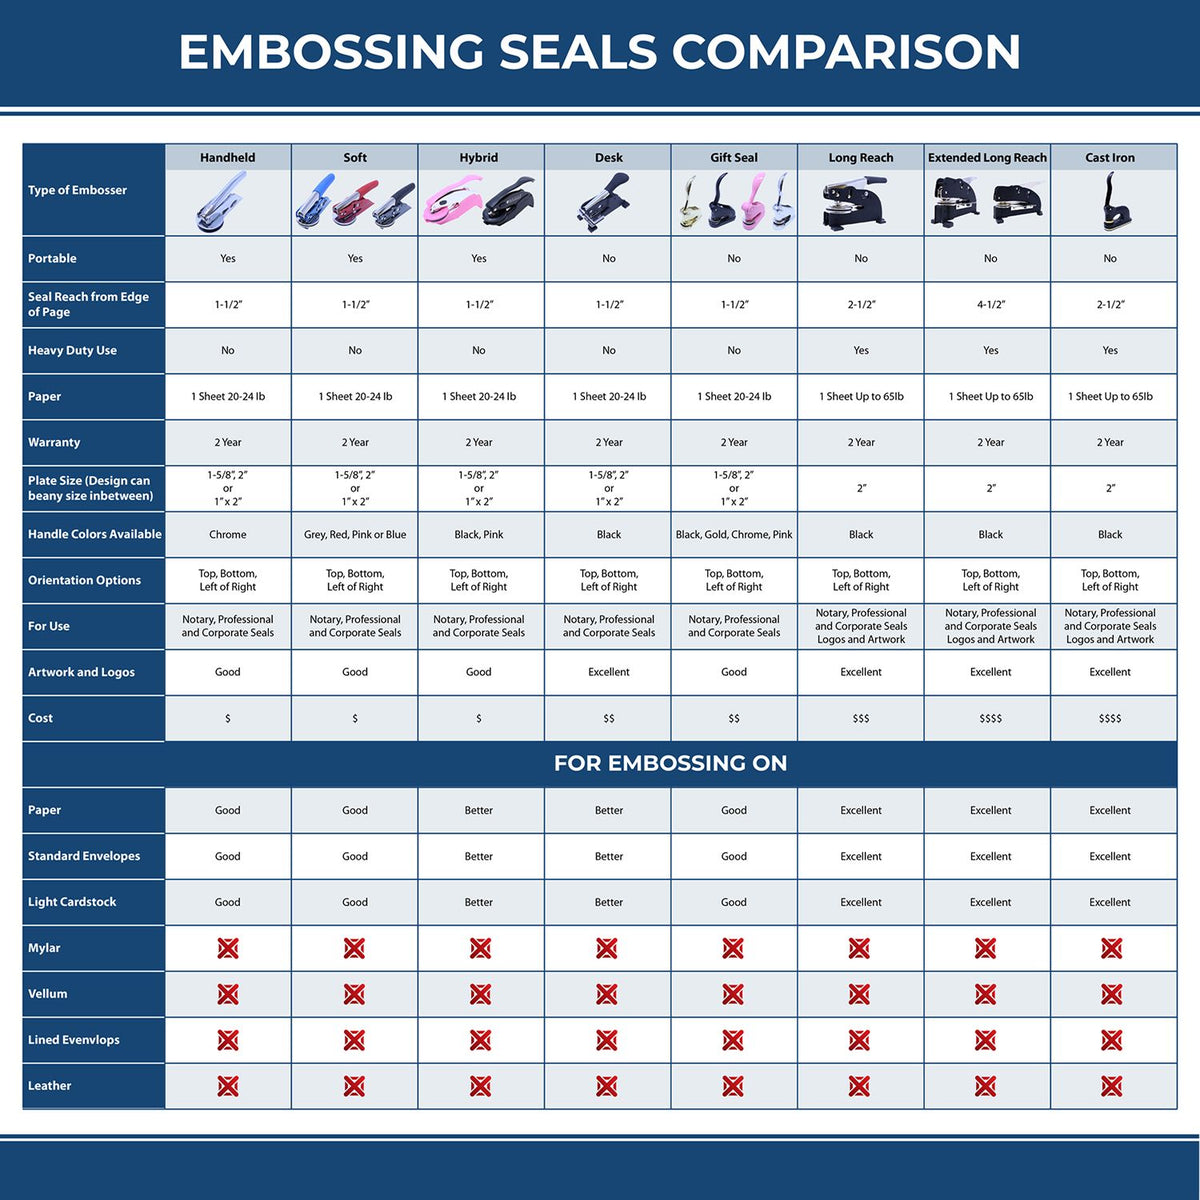 A comparison chart for the different types of mount models available for the Soft Idaho Professional Geologist Seal